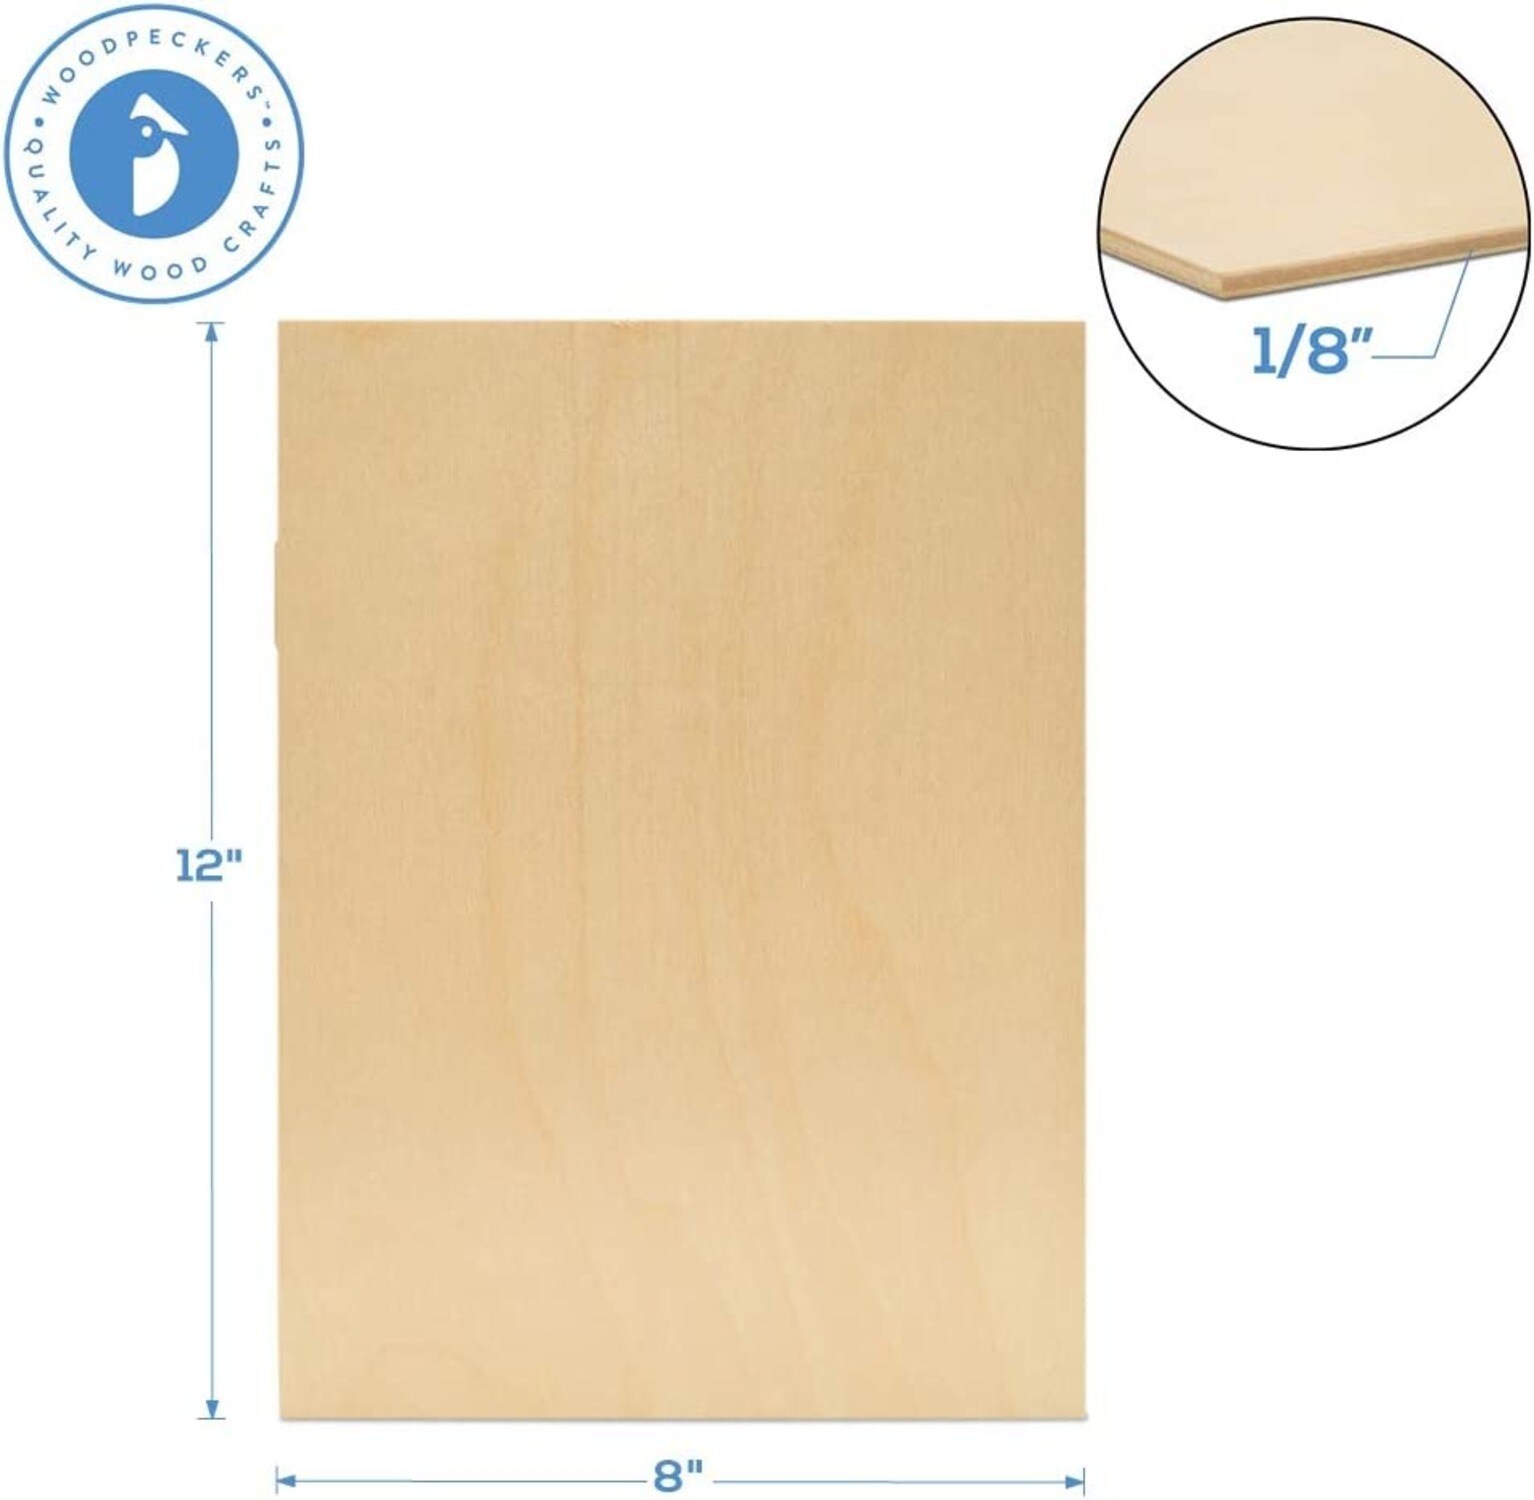 3mm 1/8 x 4 x 4 Baltic Birch Plywood – B/bb Grade (6PK) Perfect for Arts and Crafts, School Projects and DIY Projects, Drawing, Painting, Wood